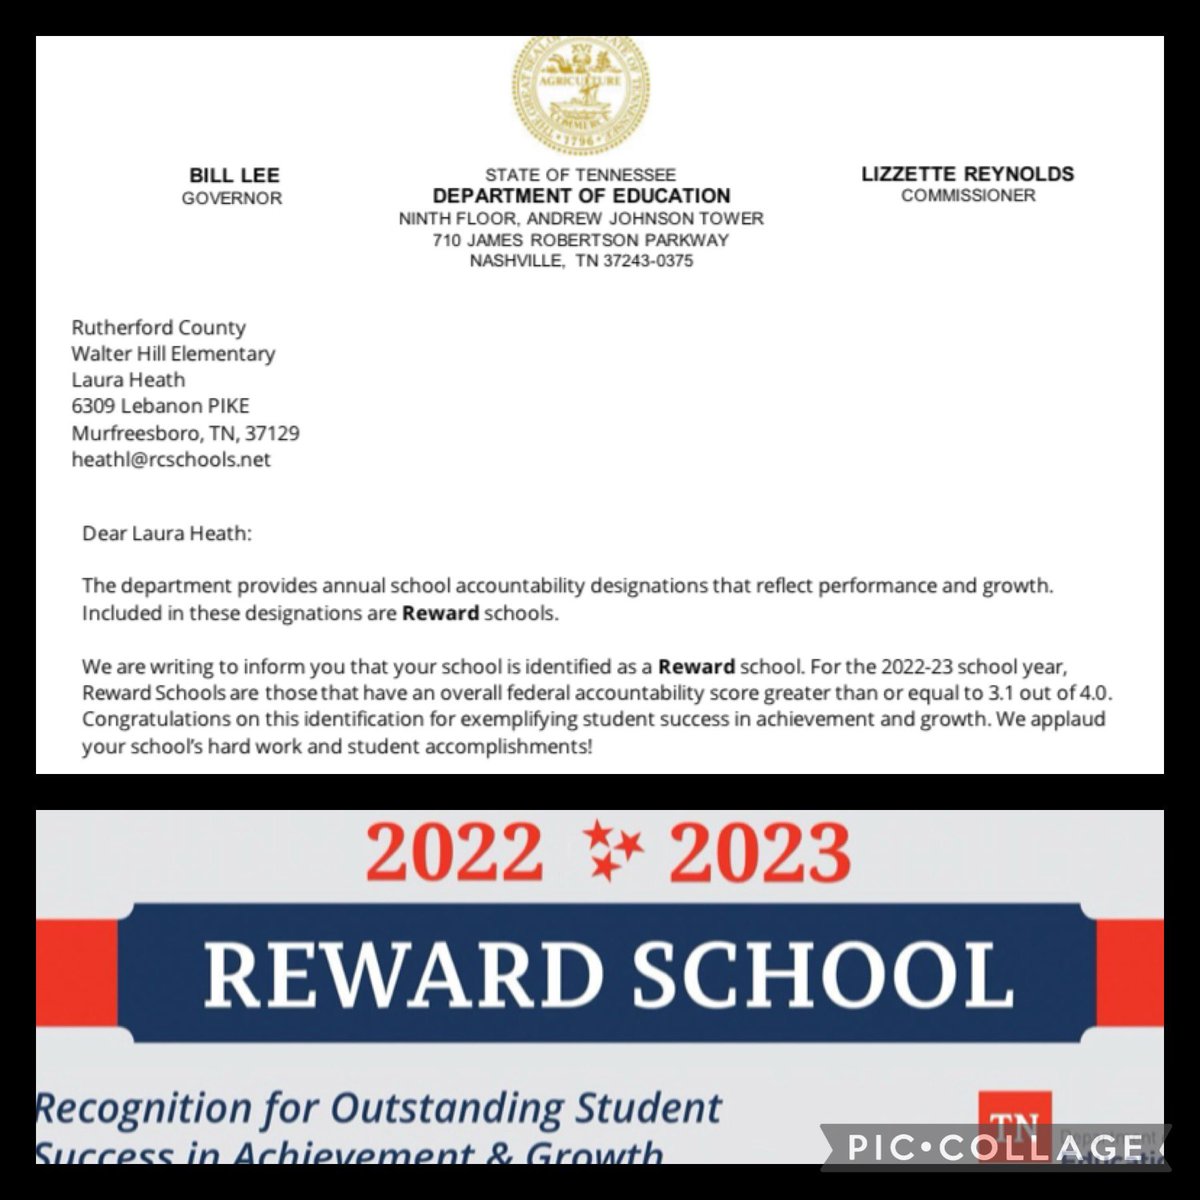 Super proud of our faculty and students for earning Reward School status! Well deserved for their hard work and dedication! 💚🐝💛@LWH_Heath @BrentBogan